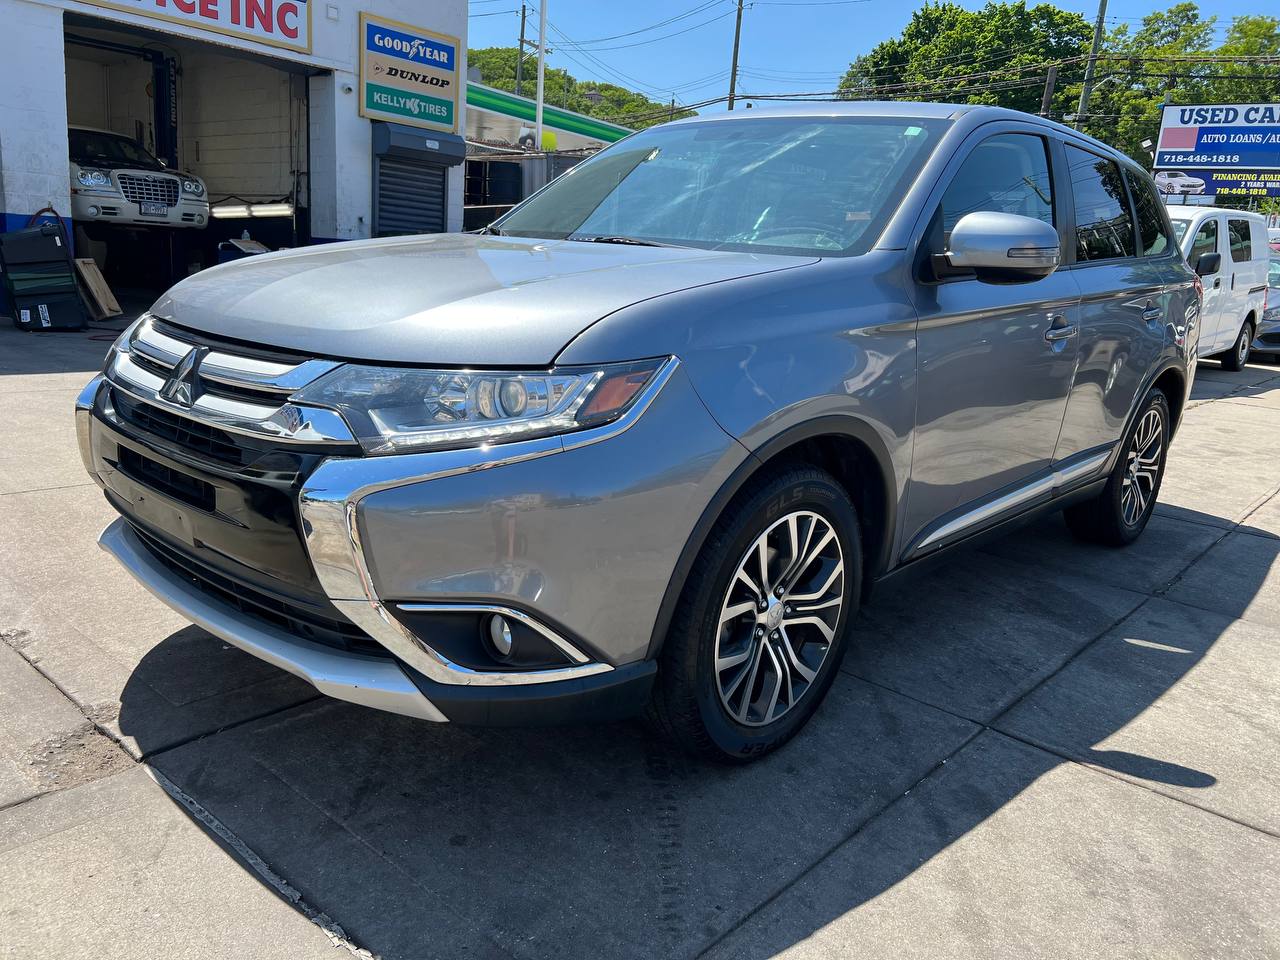 Used Car - 2017 Mitsubishi Outlander SE for Sale in Staten Island, NY